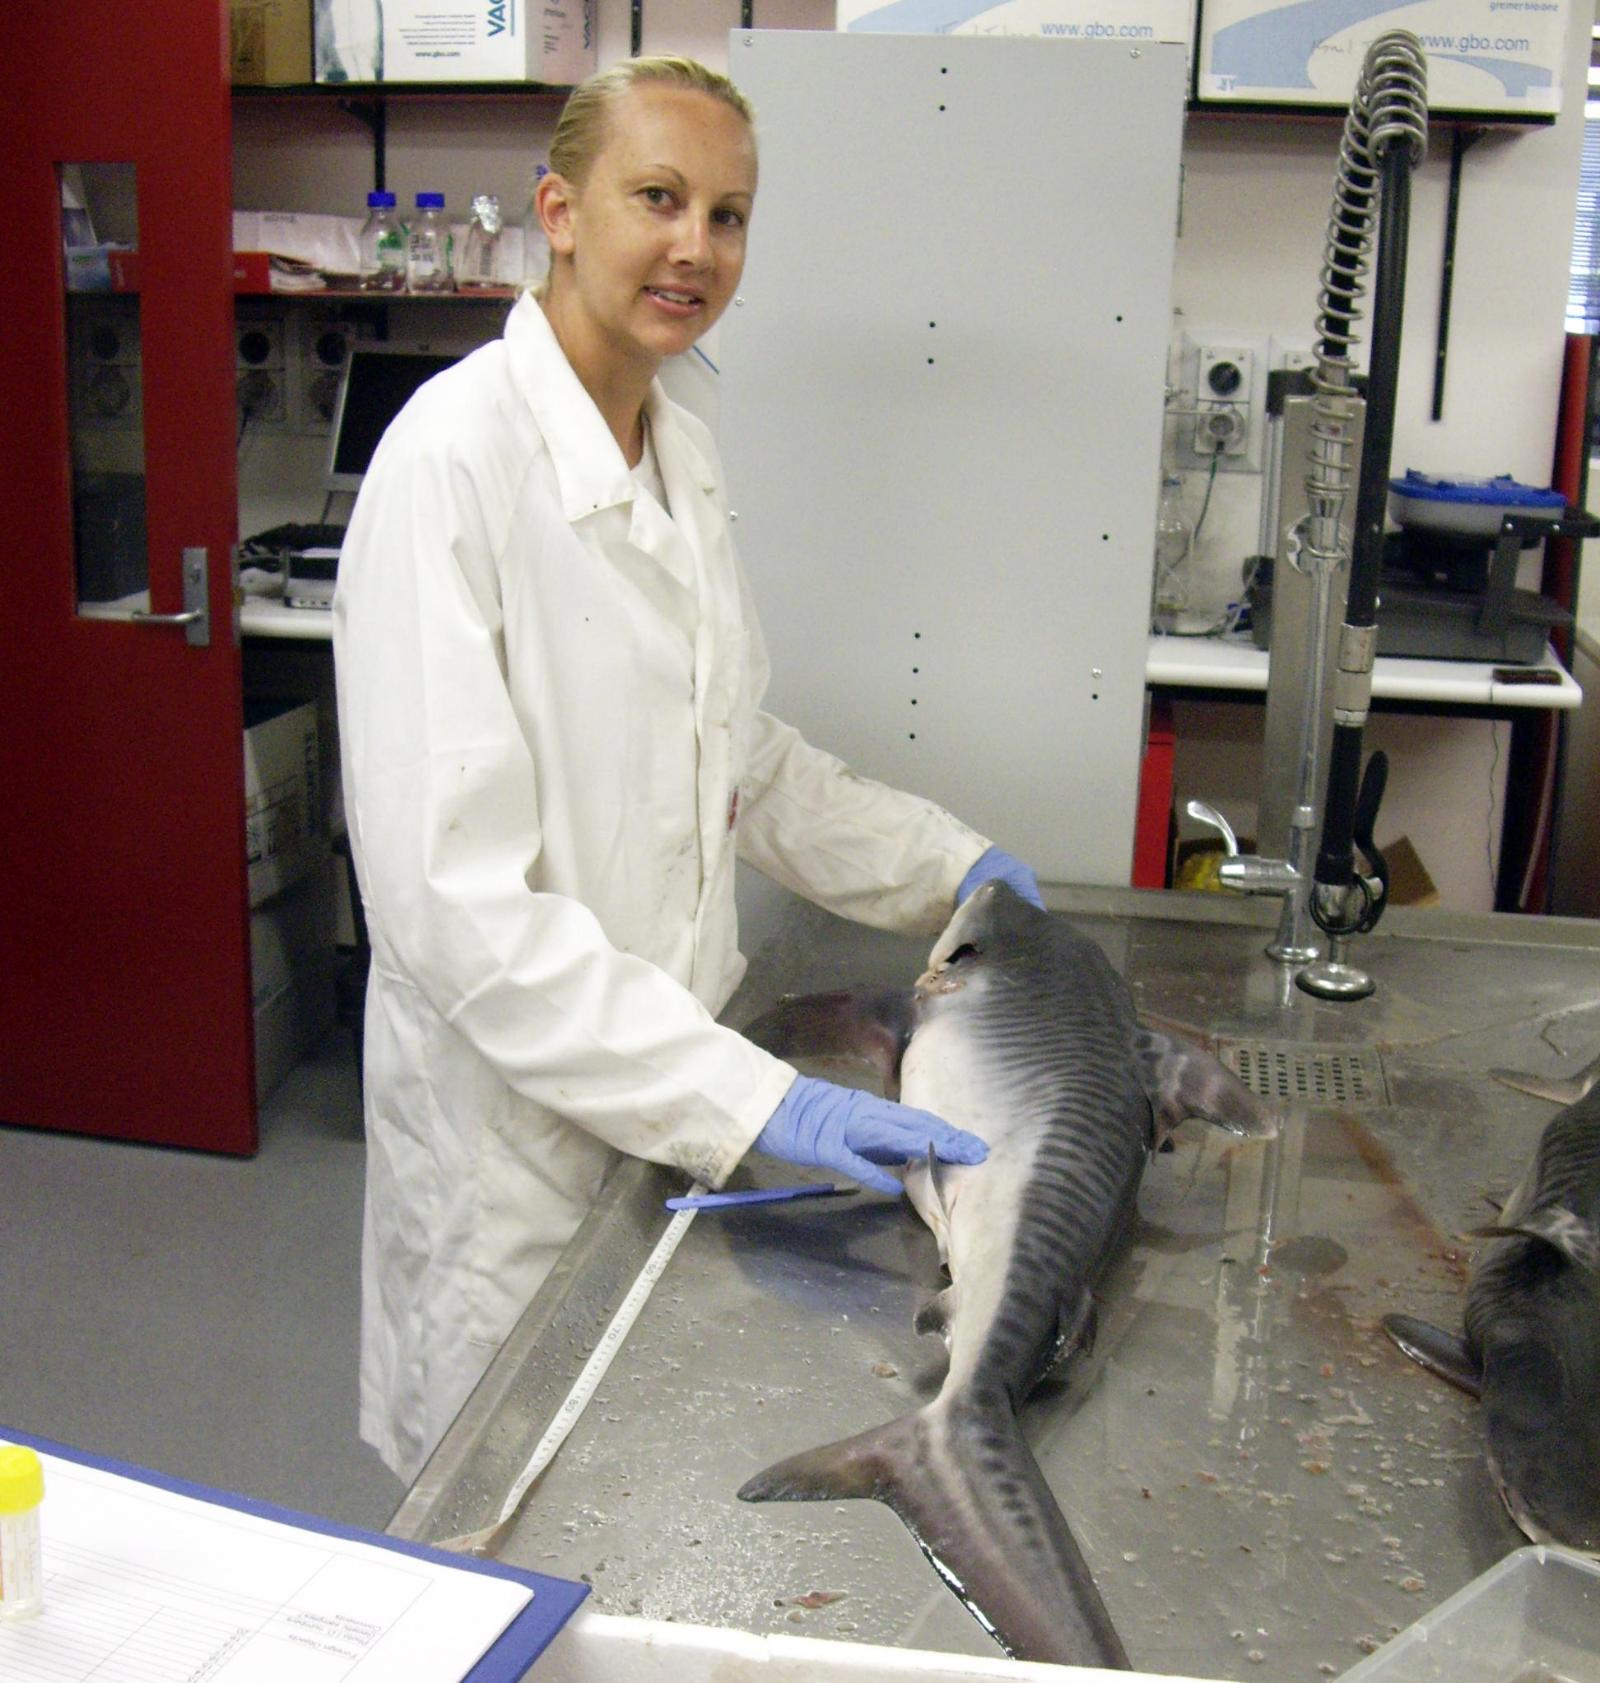 Dr Holmes with shark in lab